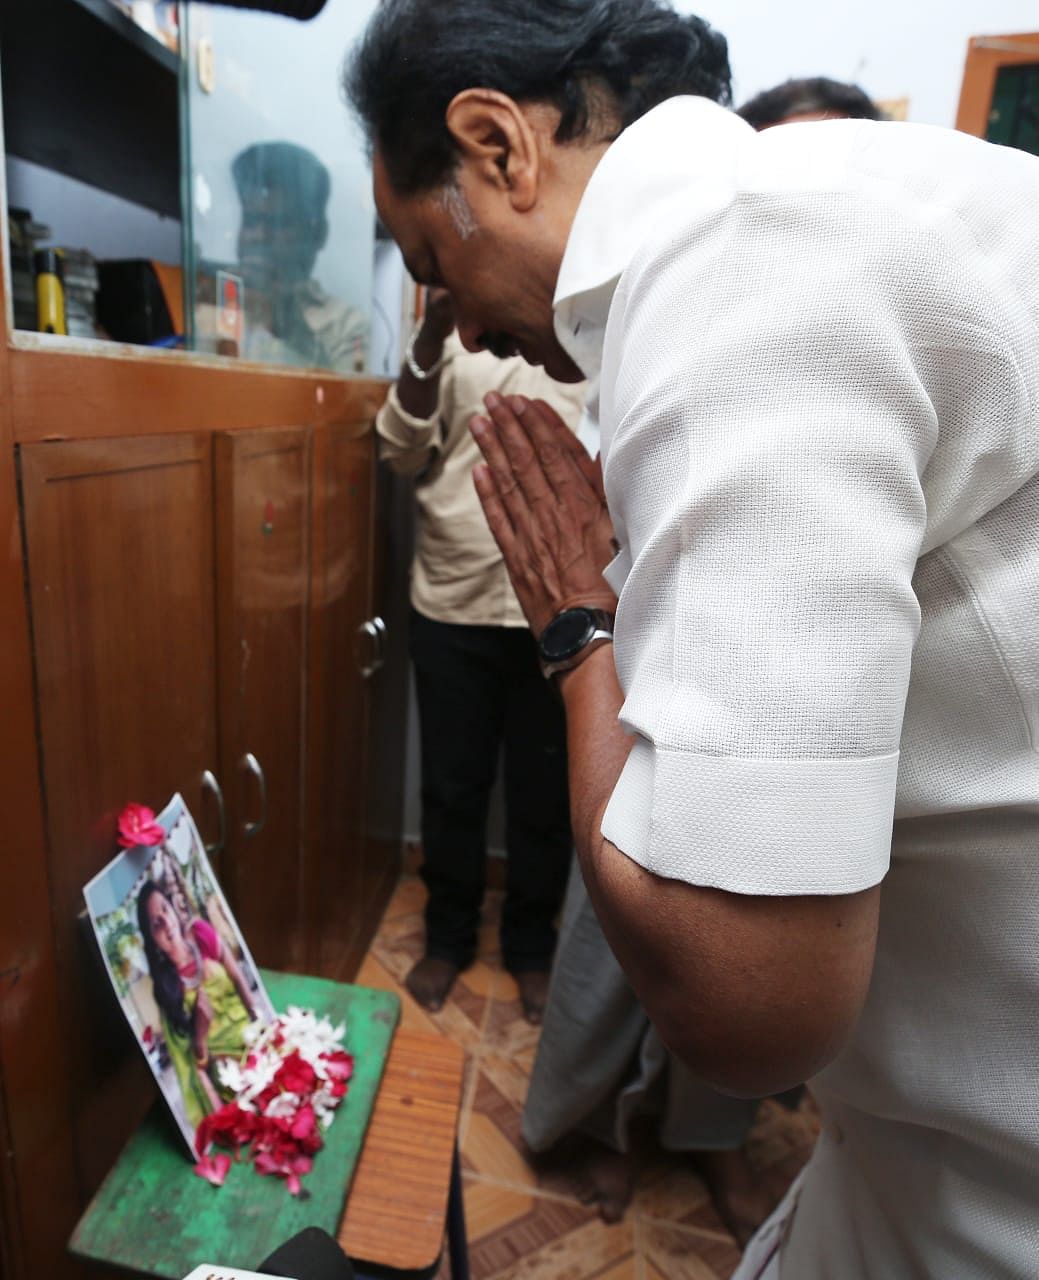 Stalin’s visit comes two day after MNM Chief Kamal Haasan met the grieving family. 